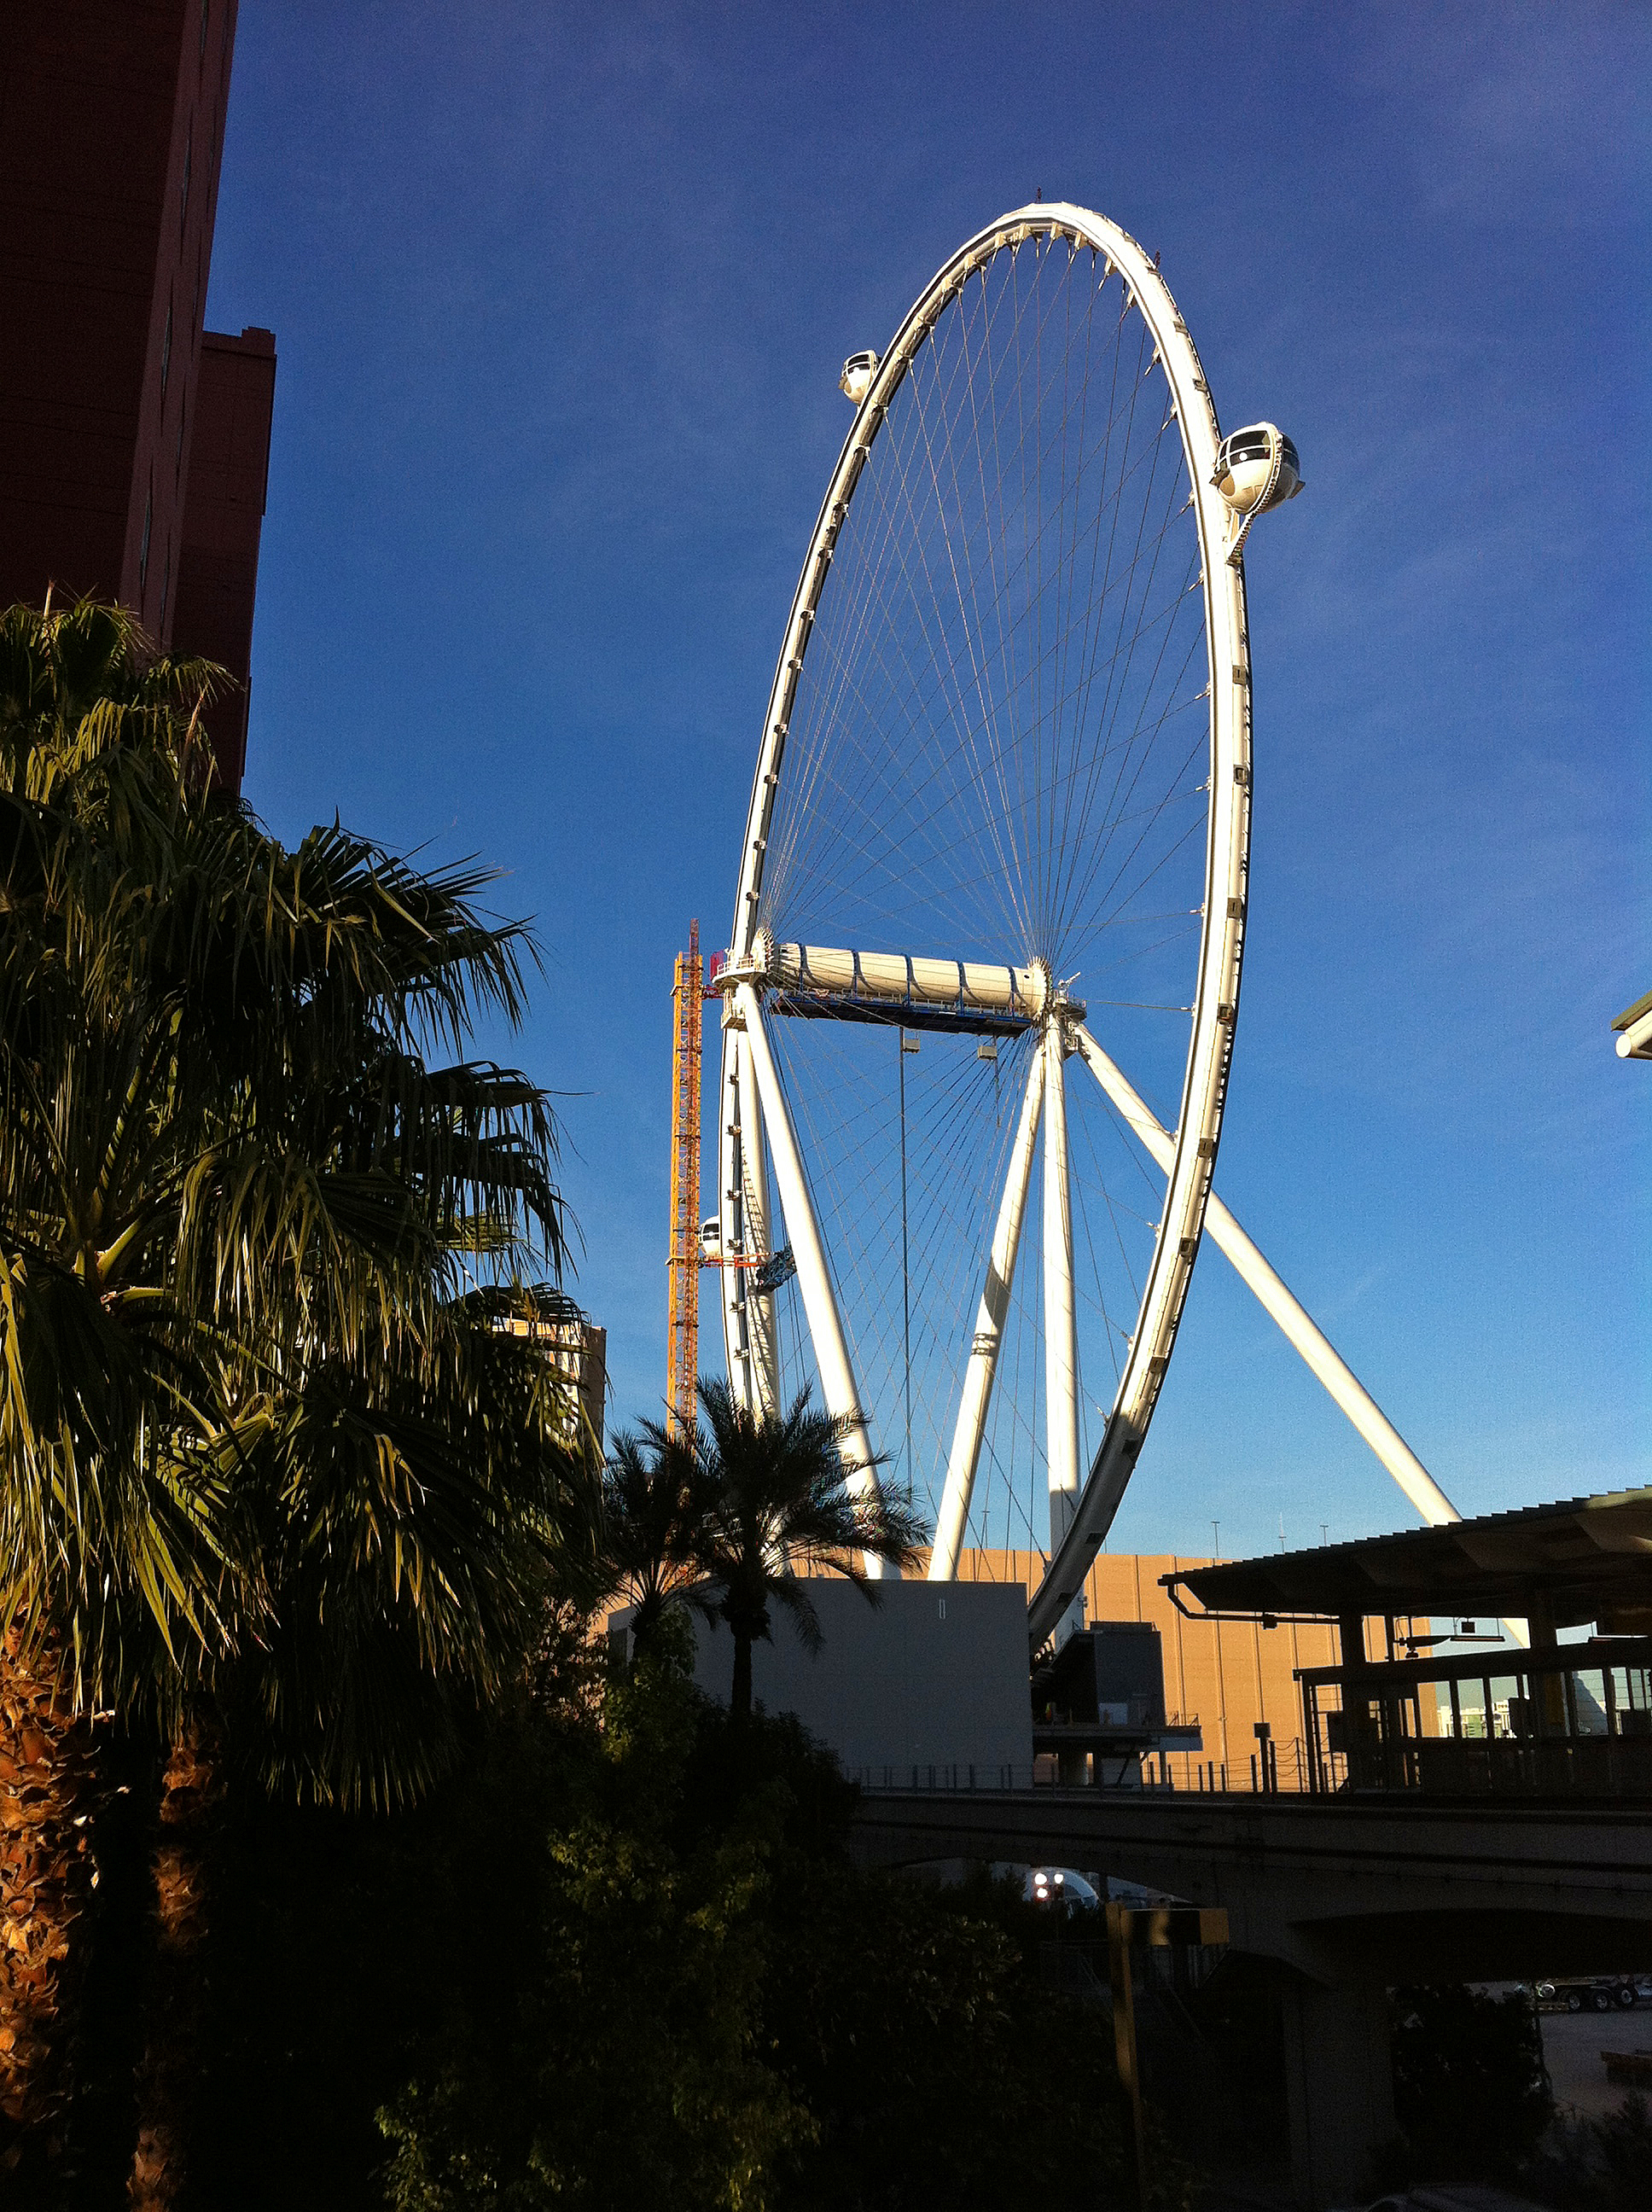 ... is nerly done on the High Roller. Las Vegas' answer to the London Eye